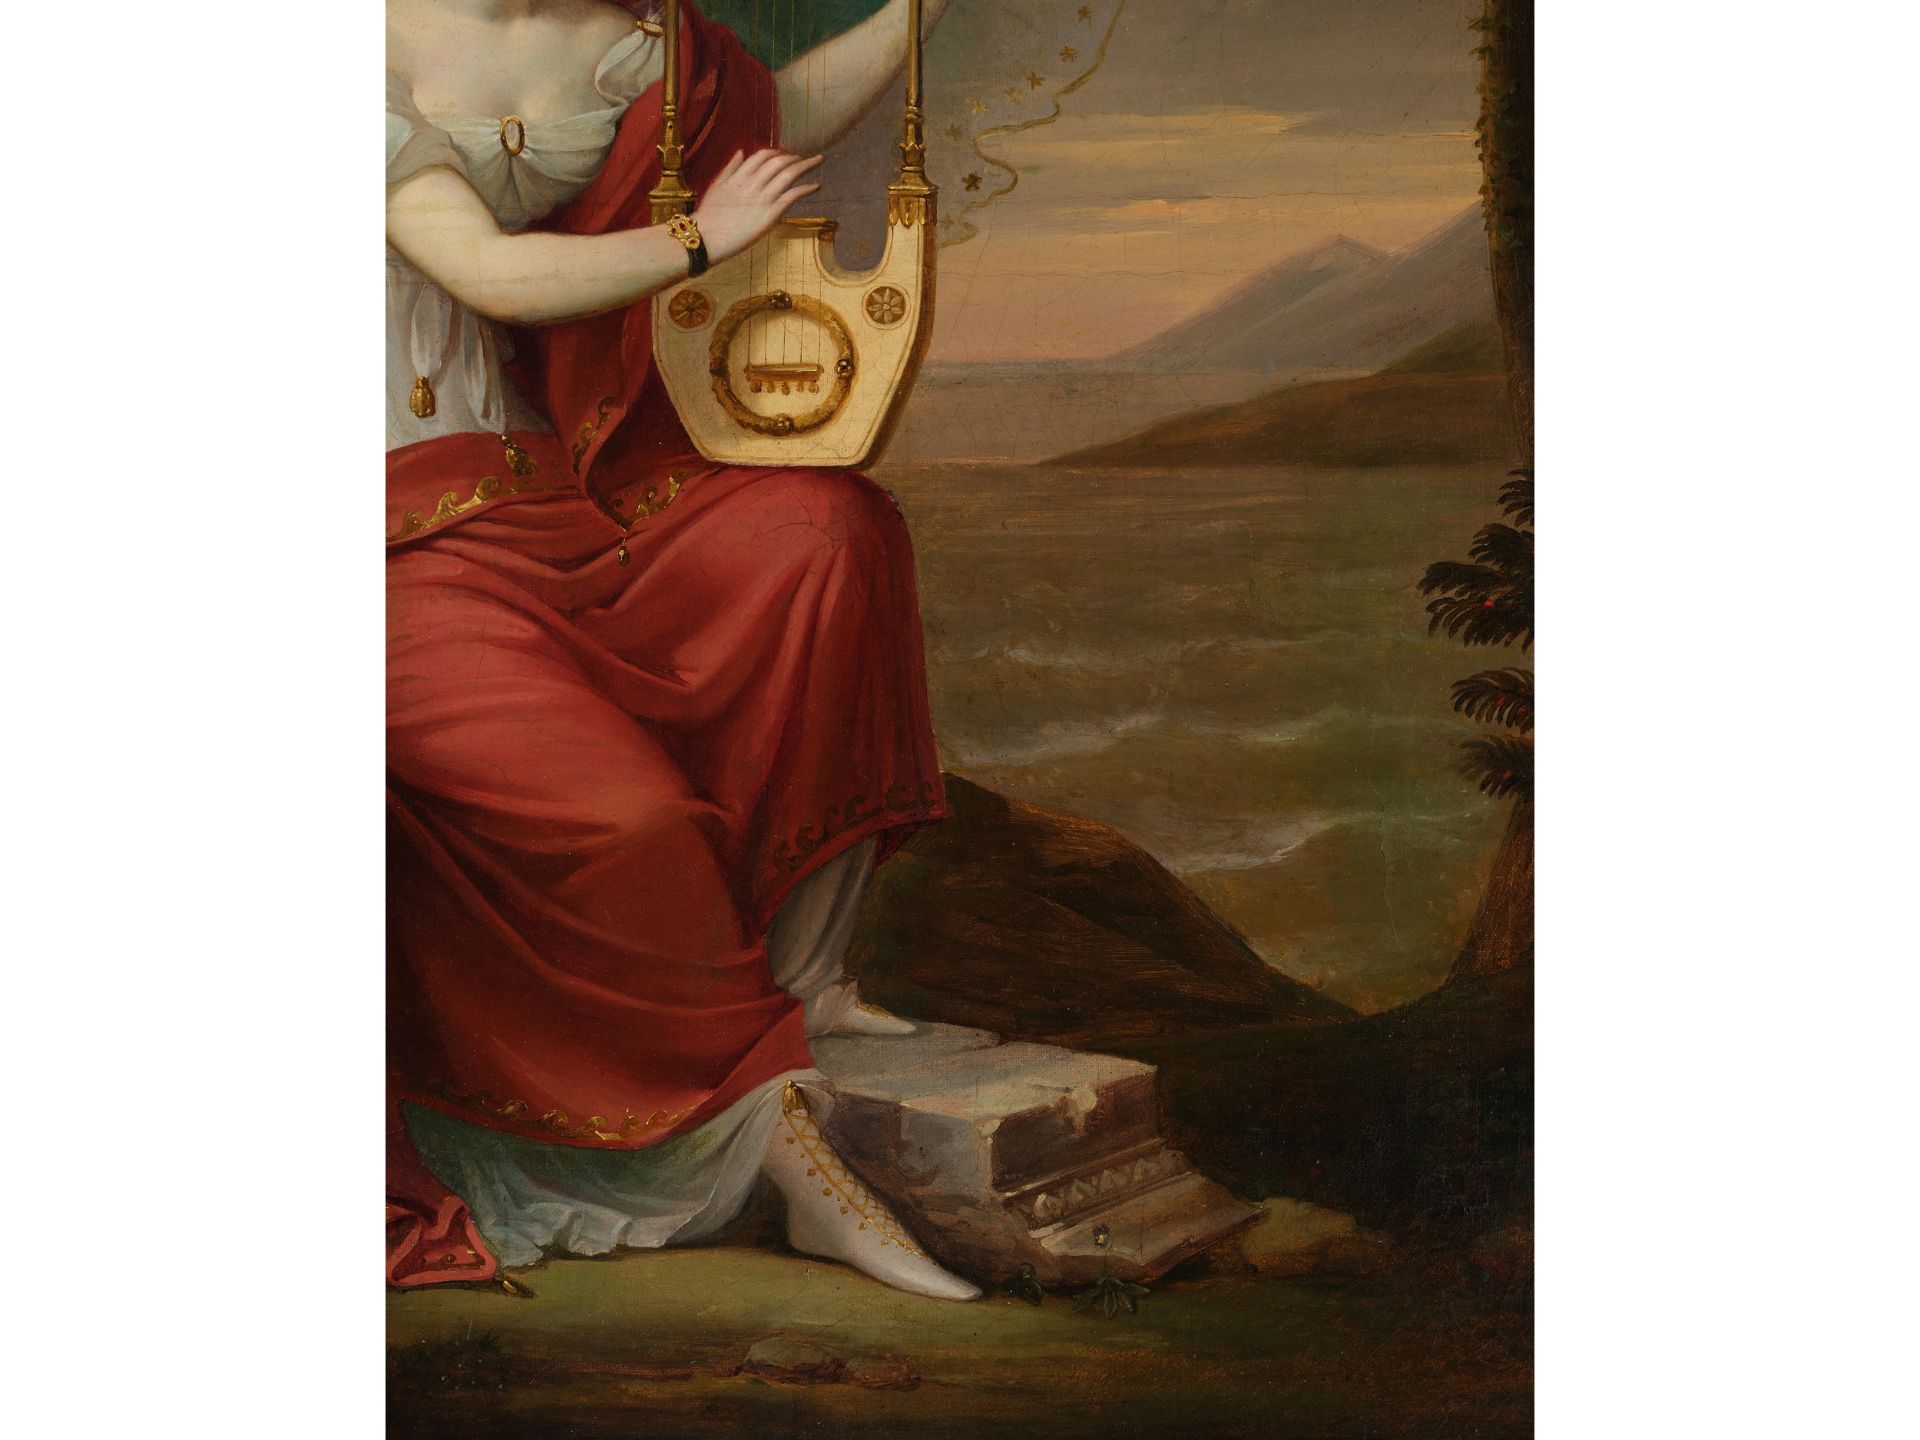 Classicist artist, Lady with lyre, Around 1800 - Image 4 of 7